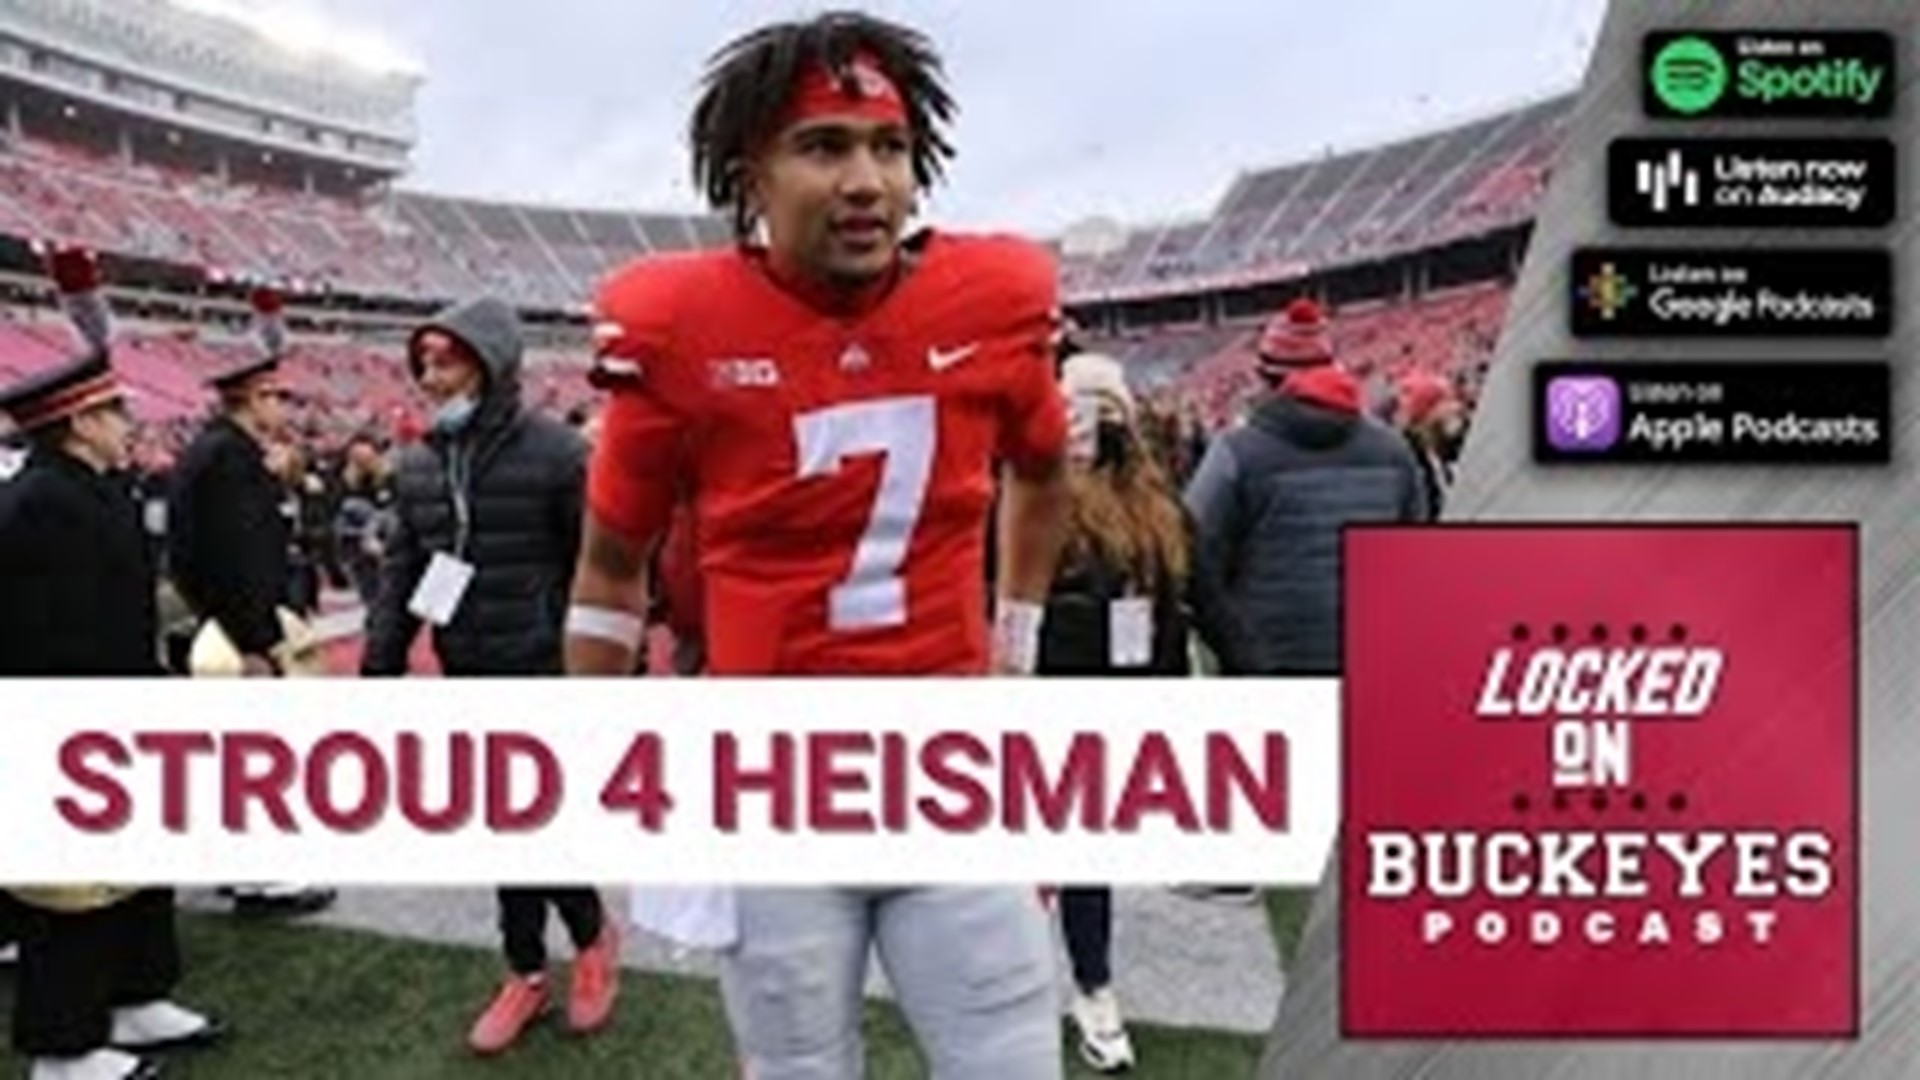 CJ Stroud enters his second year as the starting QB for Ohio State. Betonline.ag recently updated their odds for the Heisman Trophy with Stroud as a favorite.